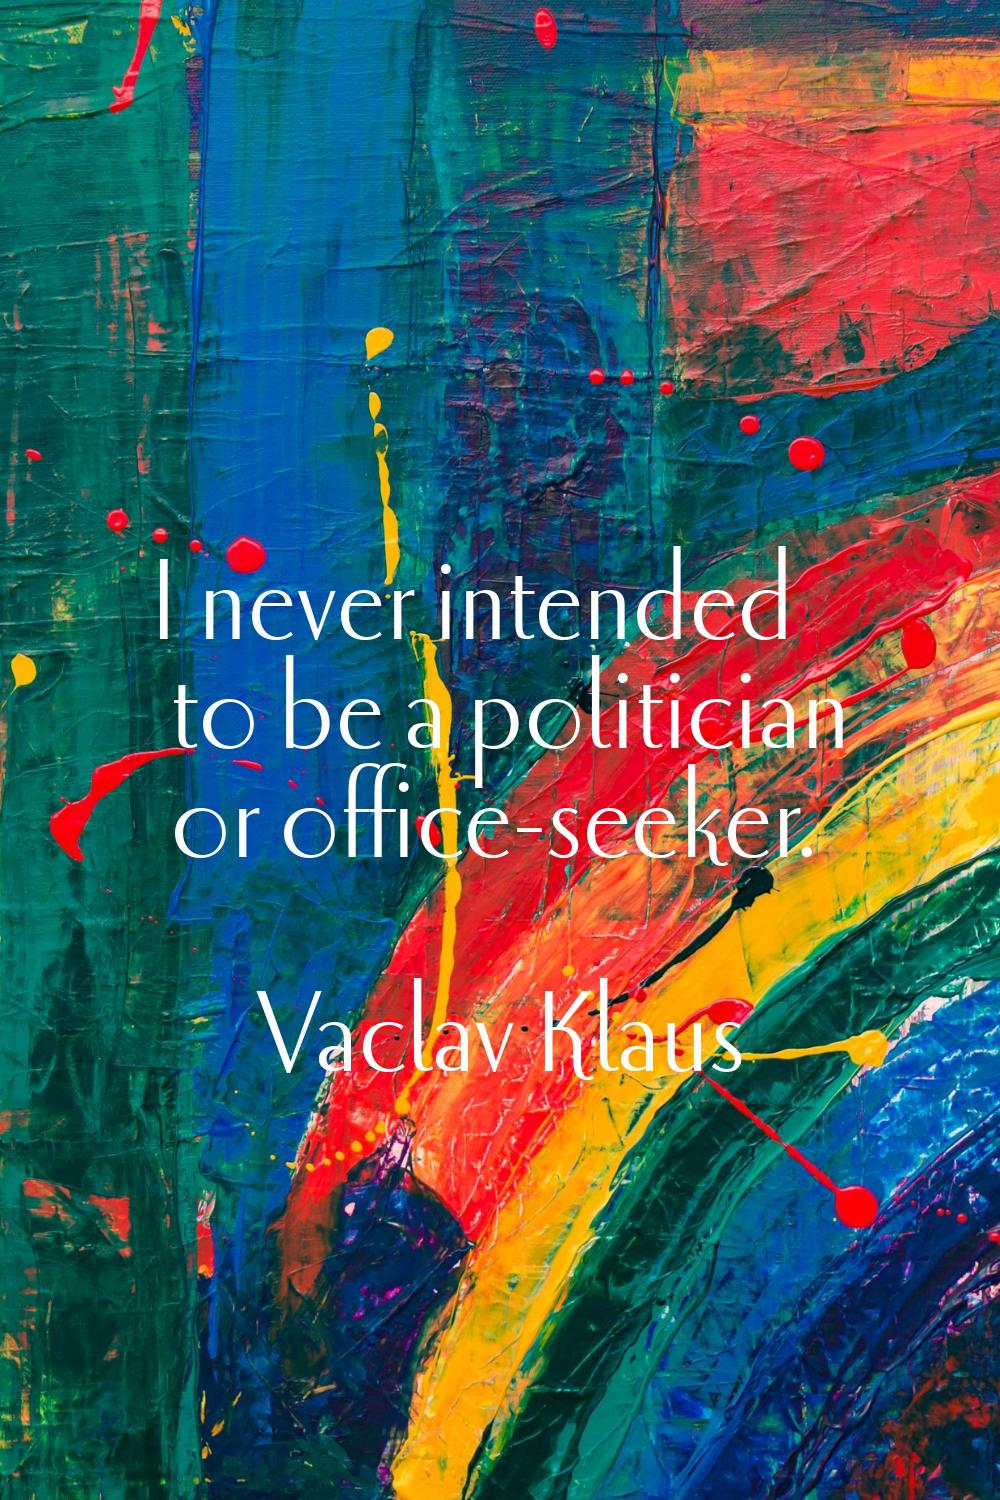 I never intended to be a politician or office-seeker.